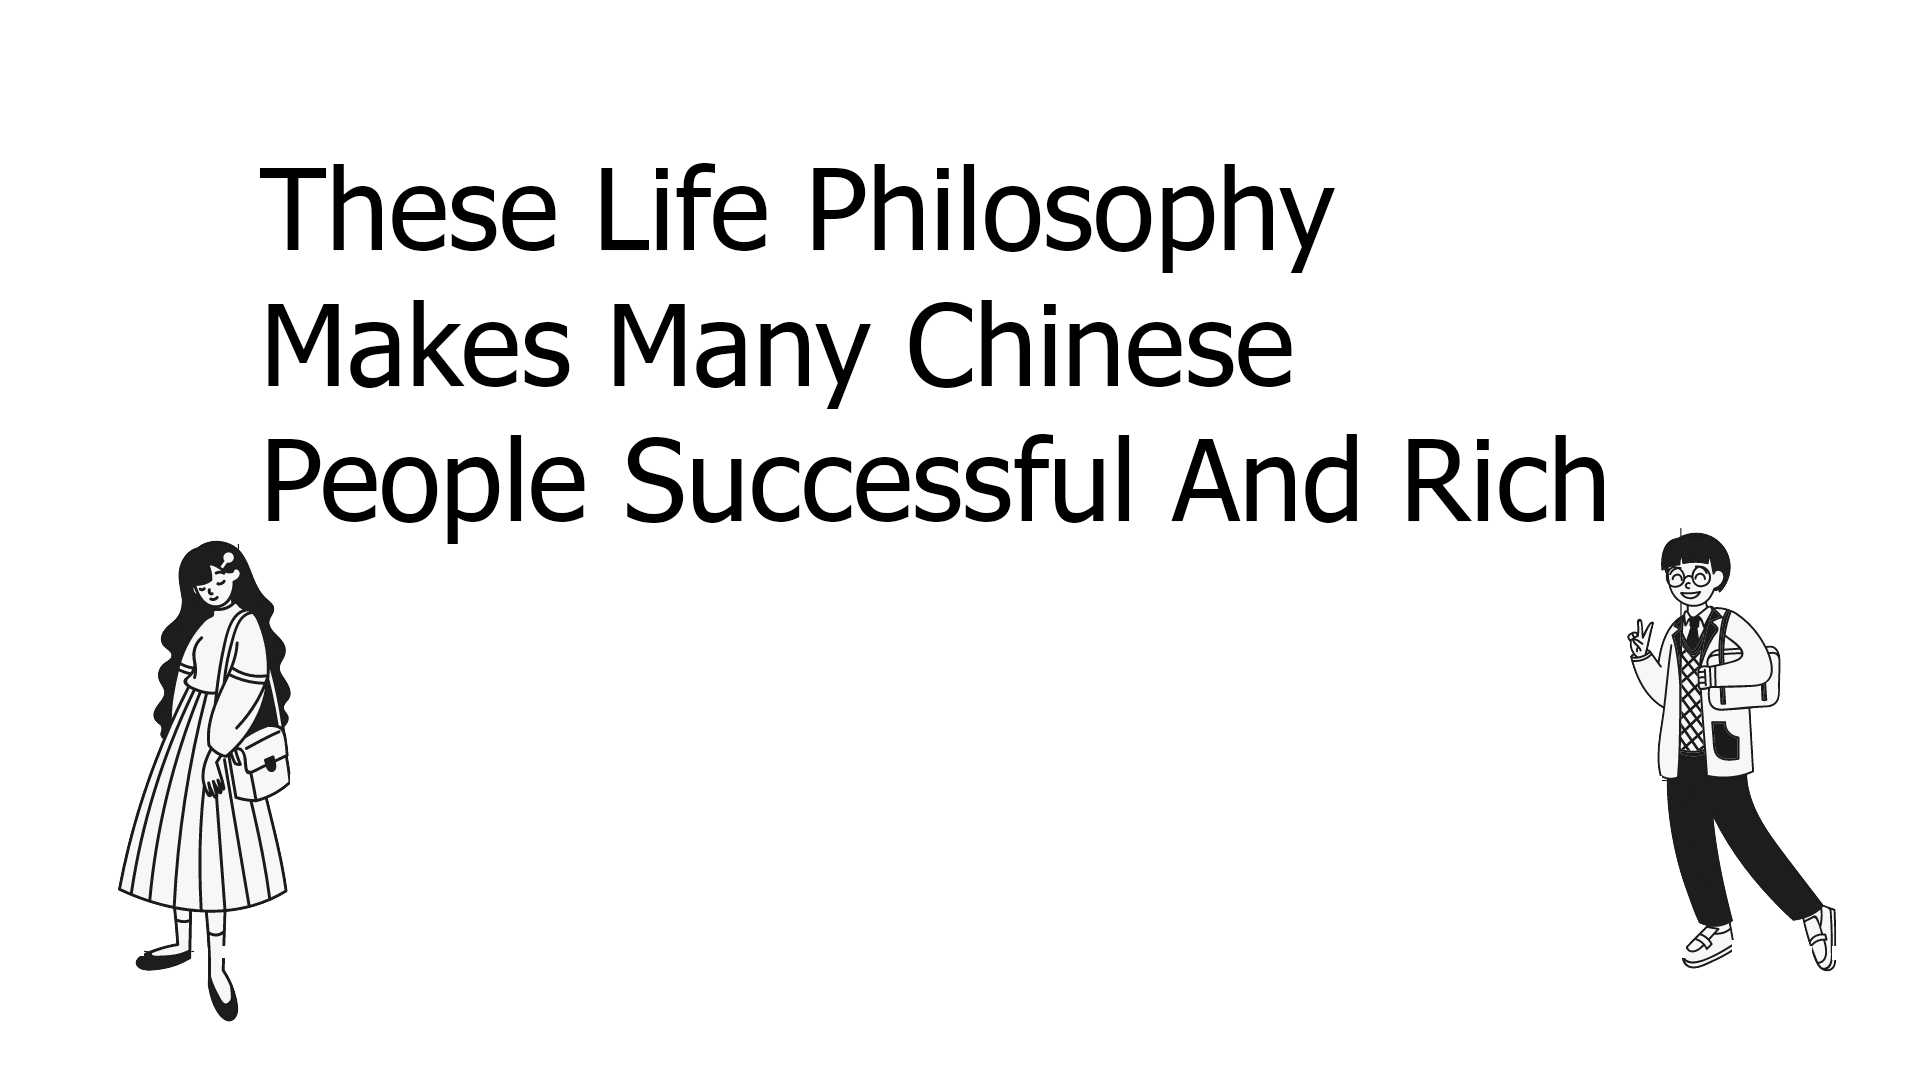 These Life Philosophy Makes Many Chinese People Successful And Rich